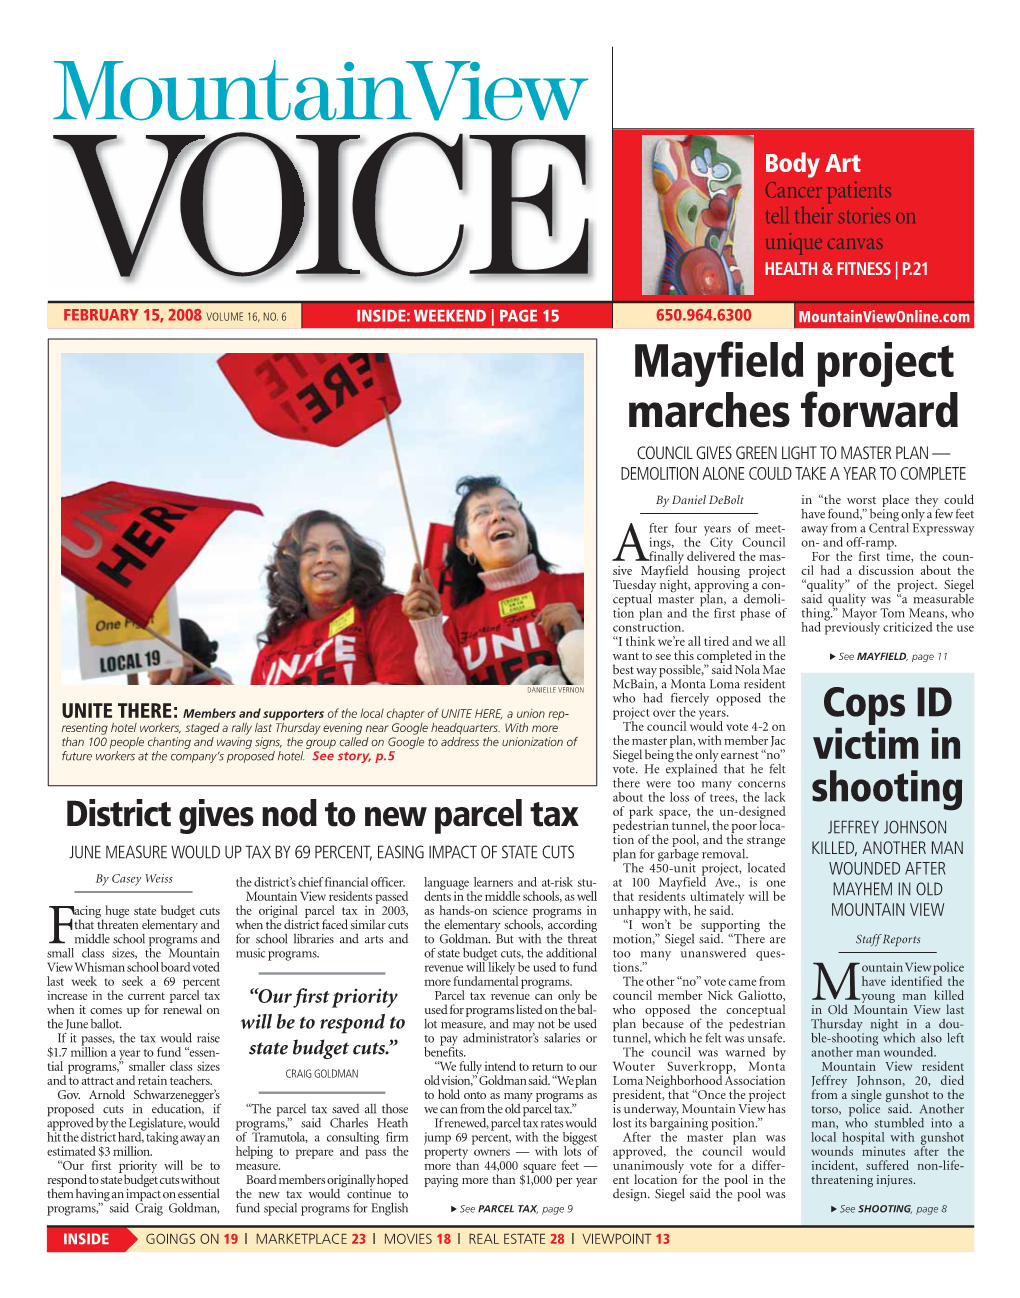 Mayfield Project Marches Forward